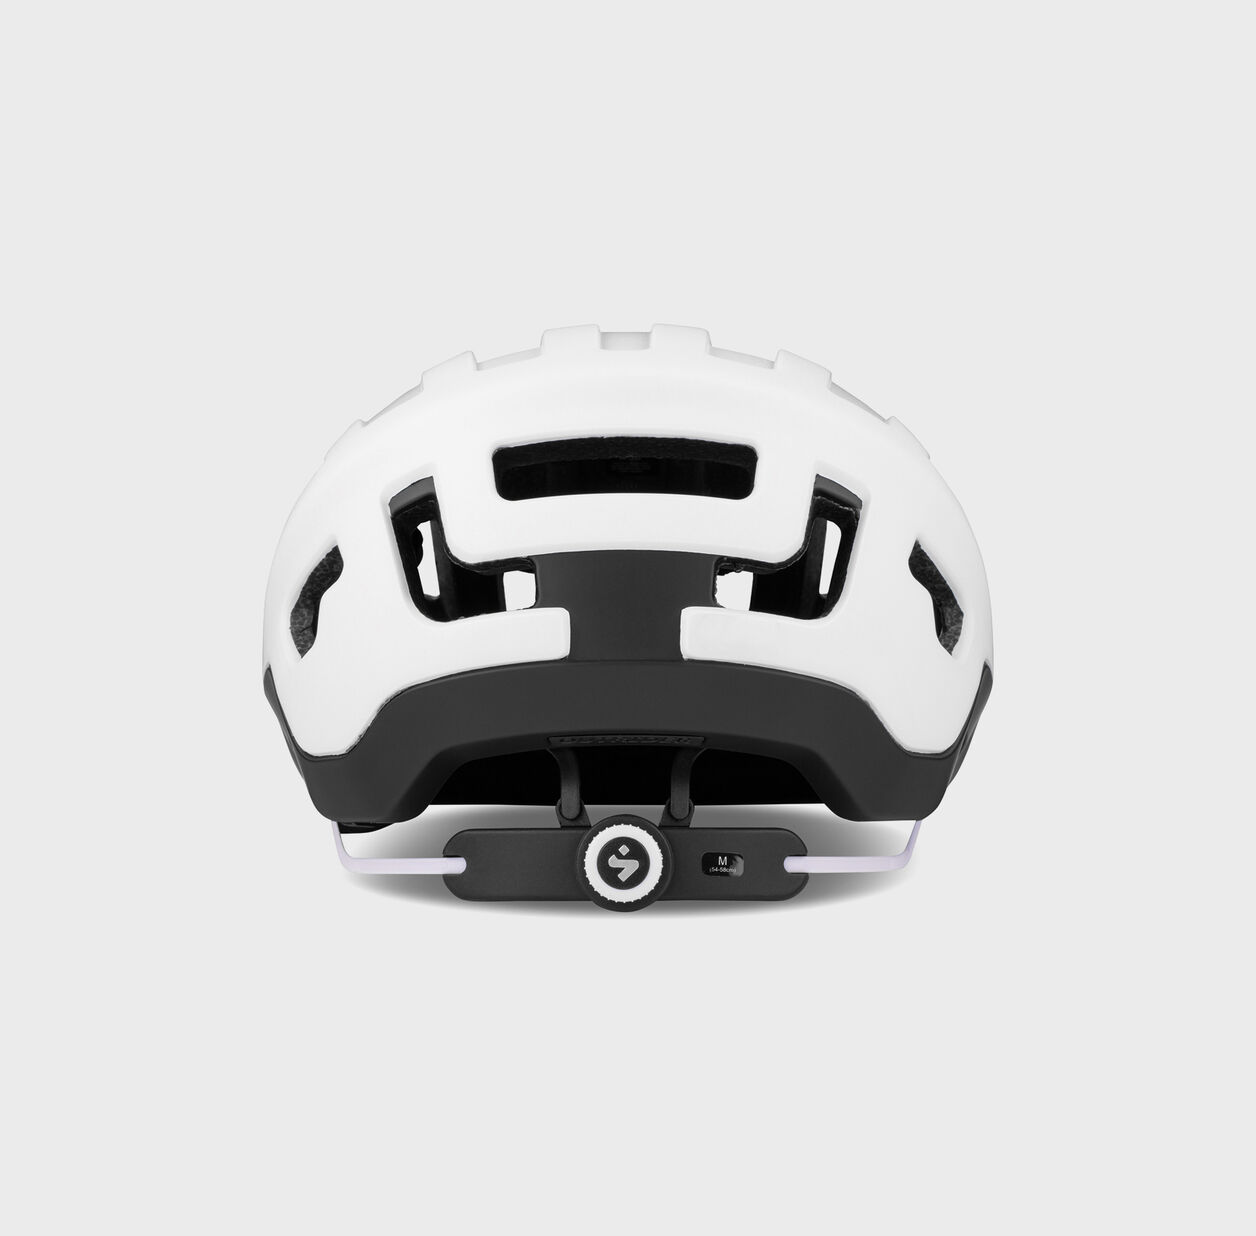 845081_Outrider-Helmet_MWHTE_PRODUCT_5_Sweetprotection